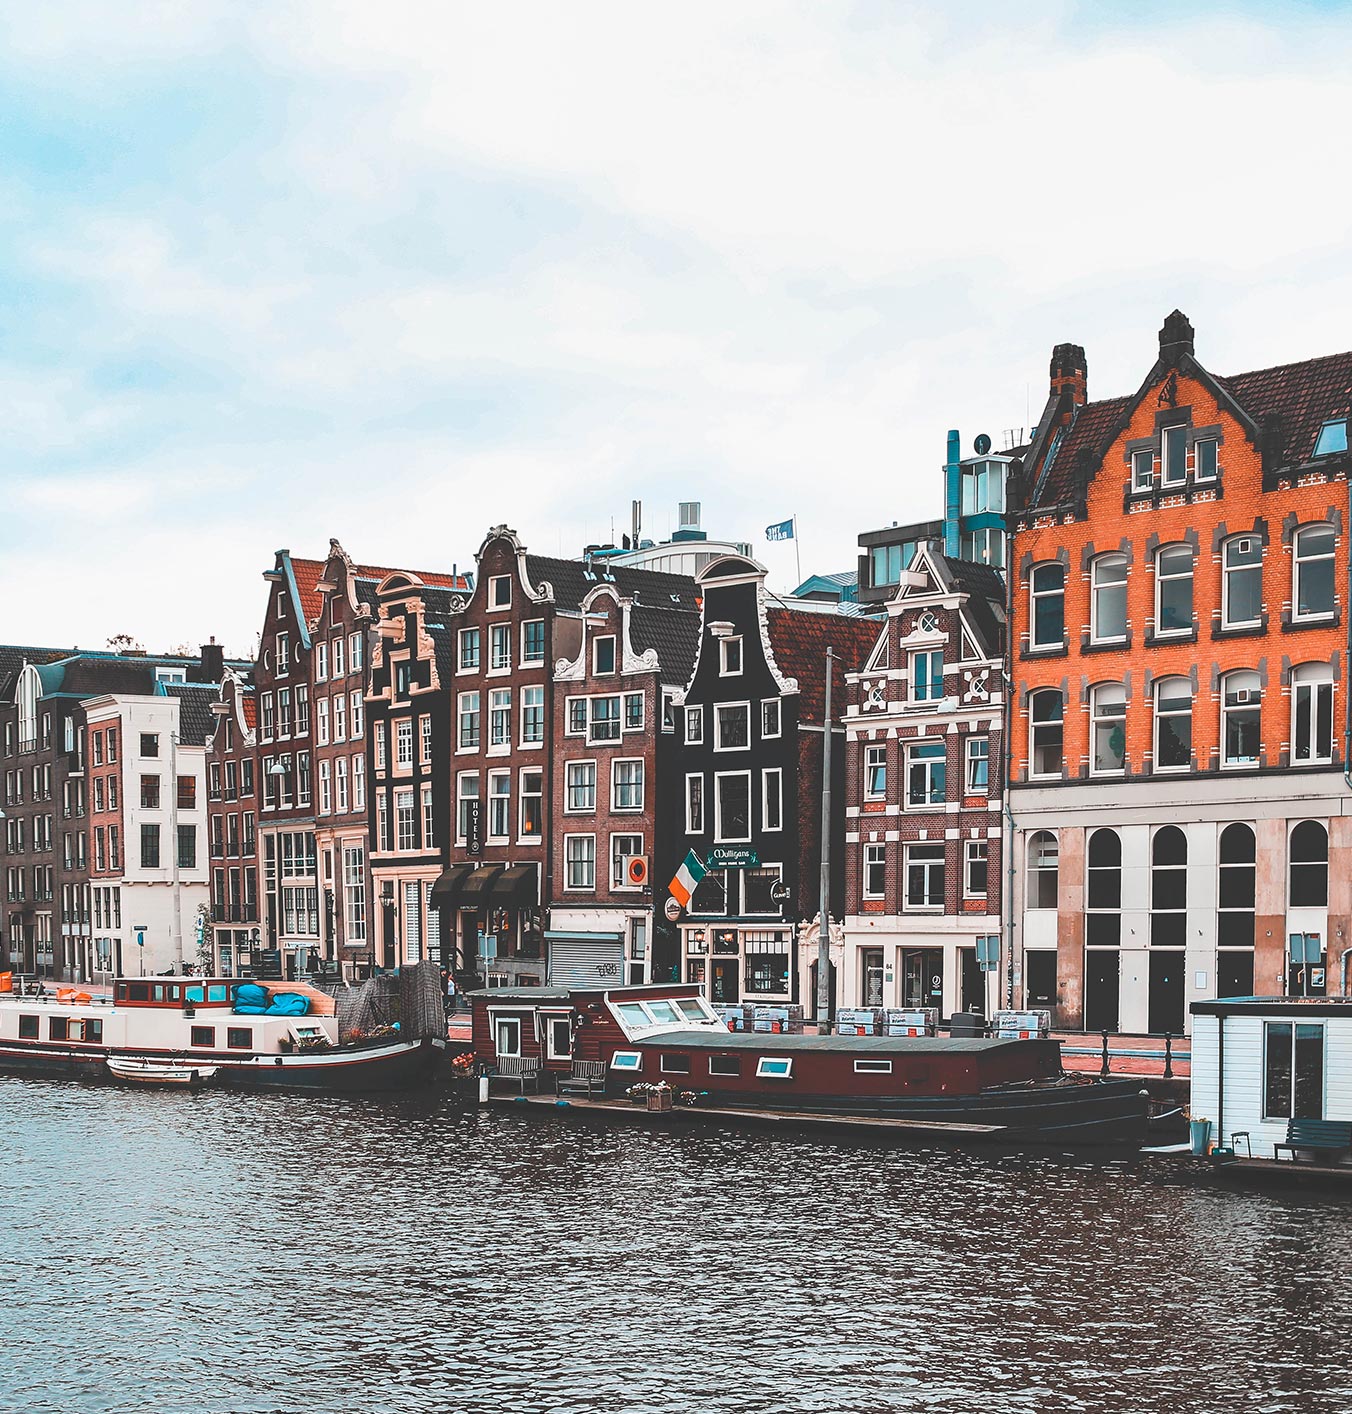 Historical secrets & urban charms in Amsterdam